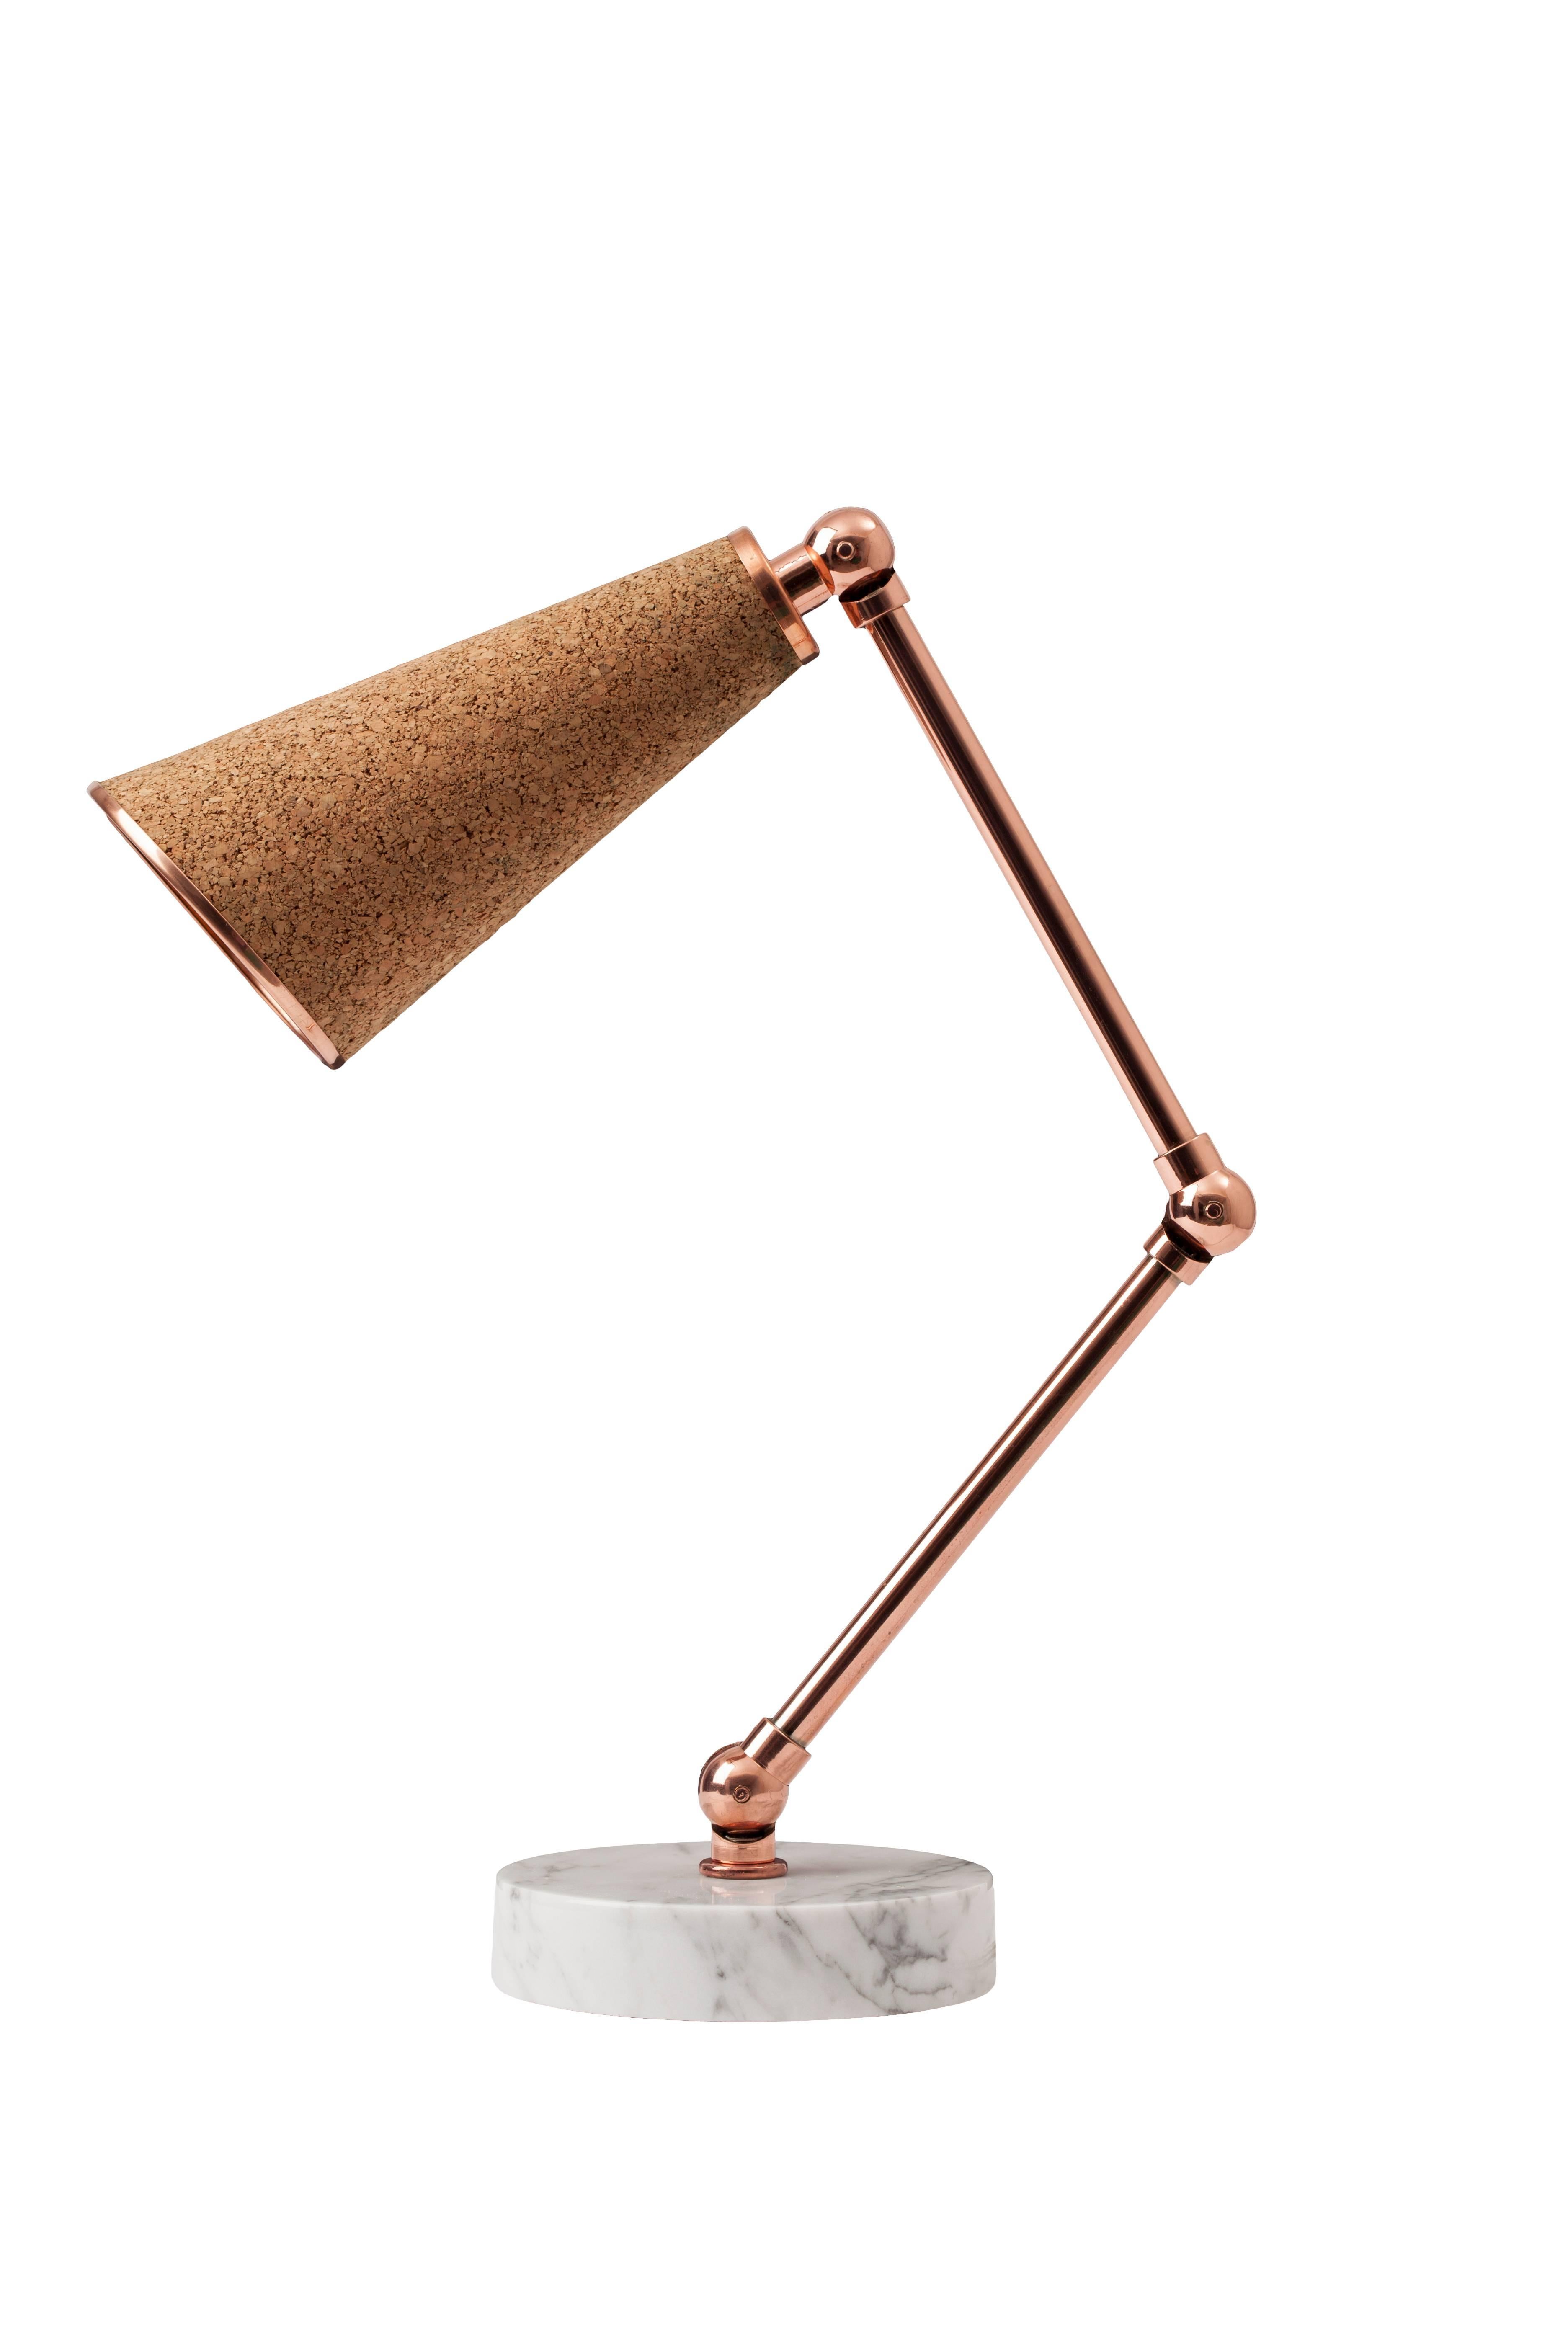 Lanterna is a new age robot lamp with a heart. Unique textured materials such as cork is combined with white marble and shiny metals such as brass. Adjustable arms of Lanterna enables users to justify the form and position of the lamp. Lanterna can